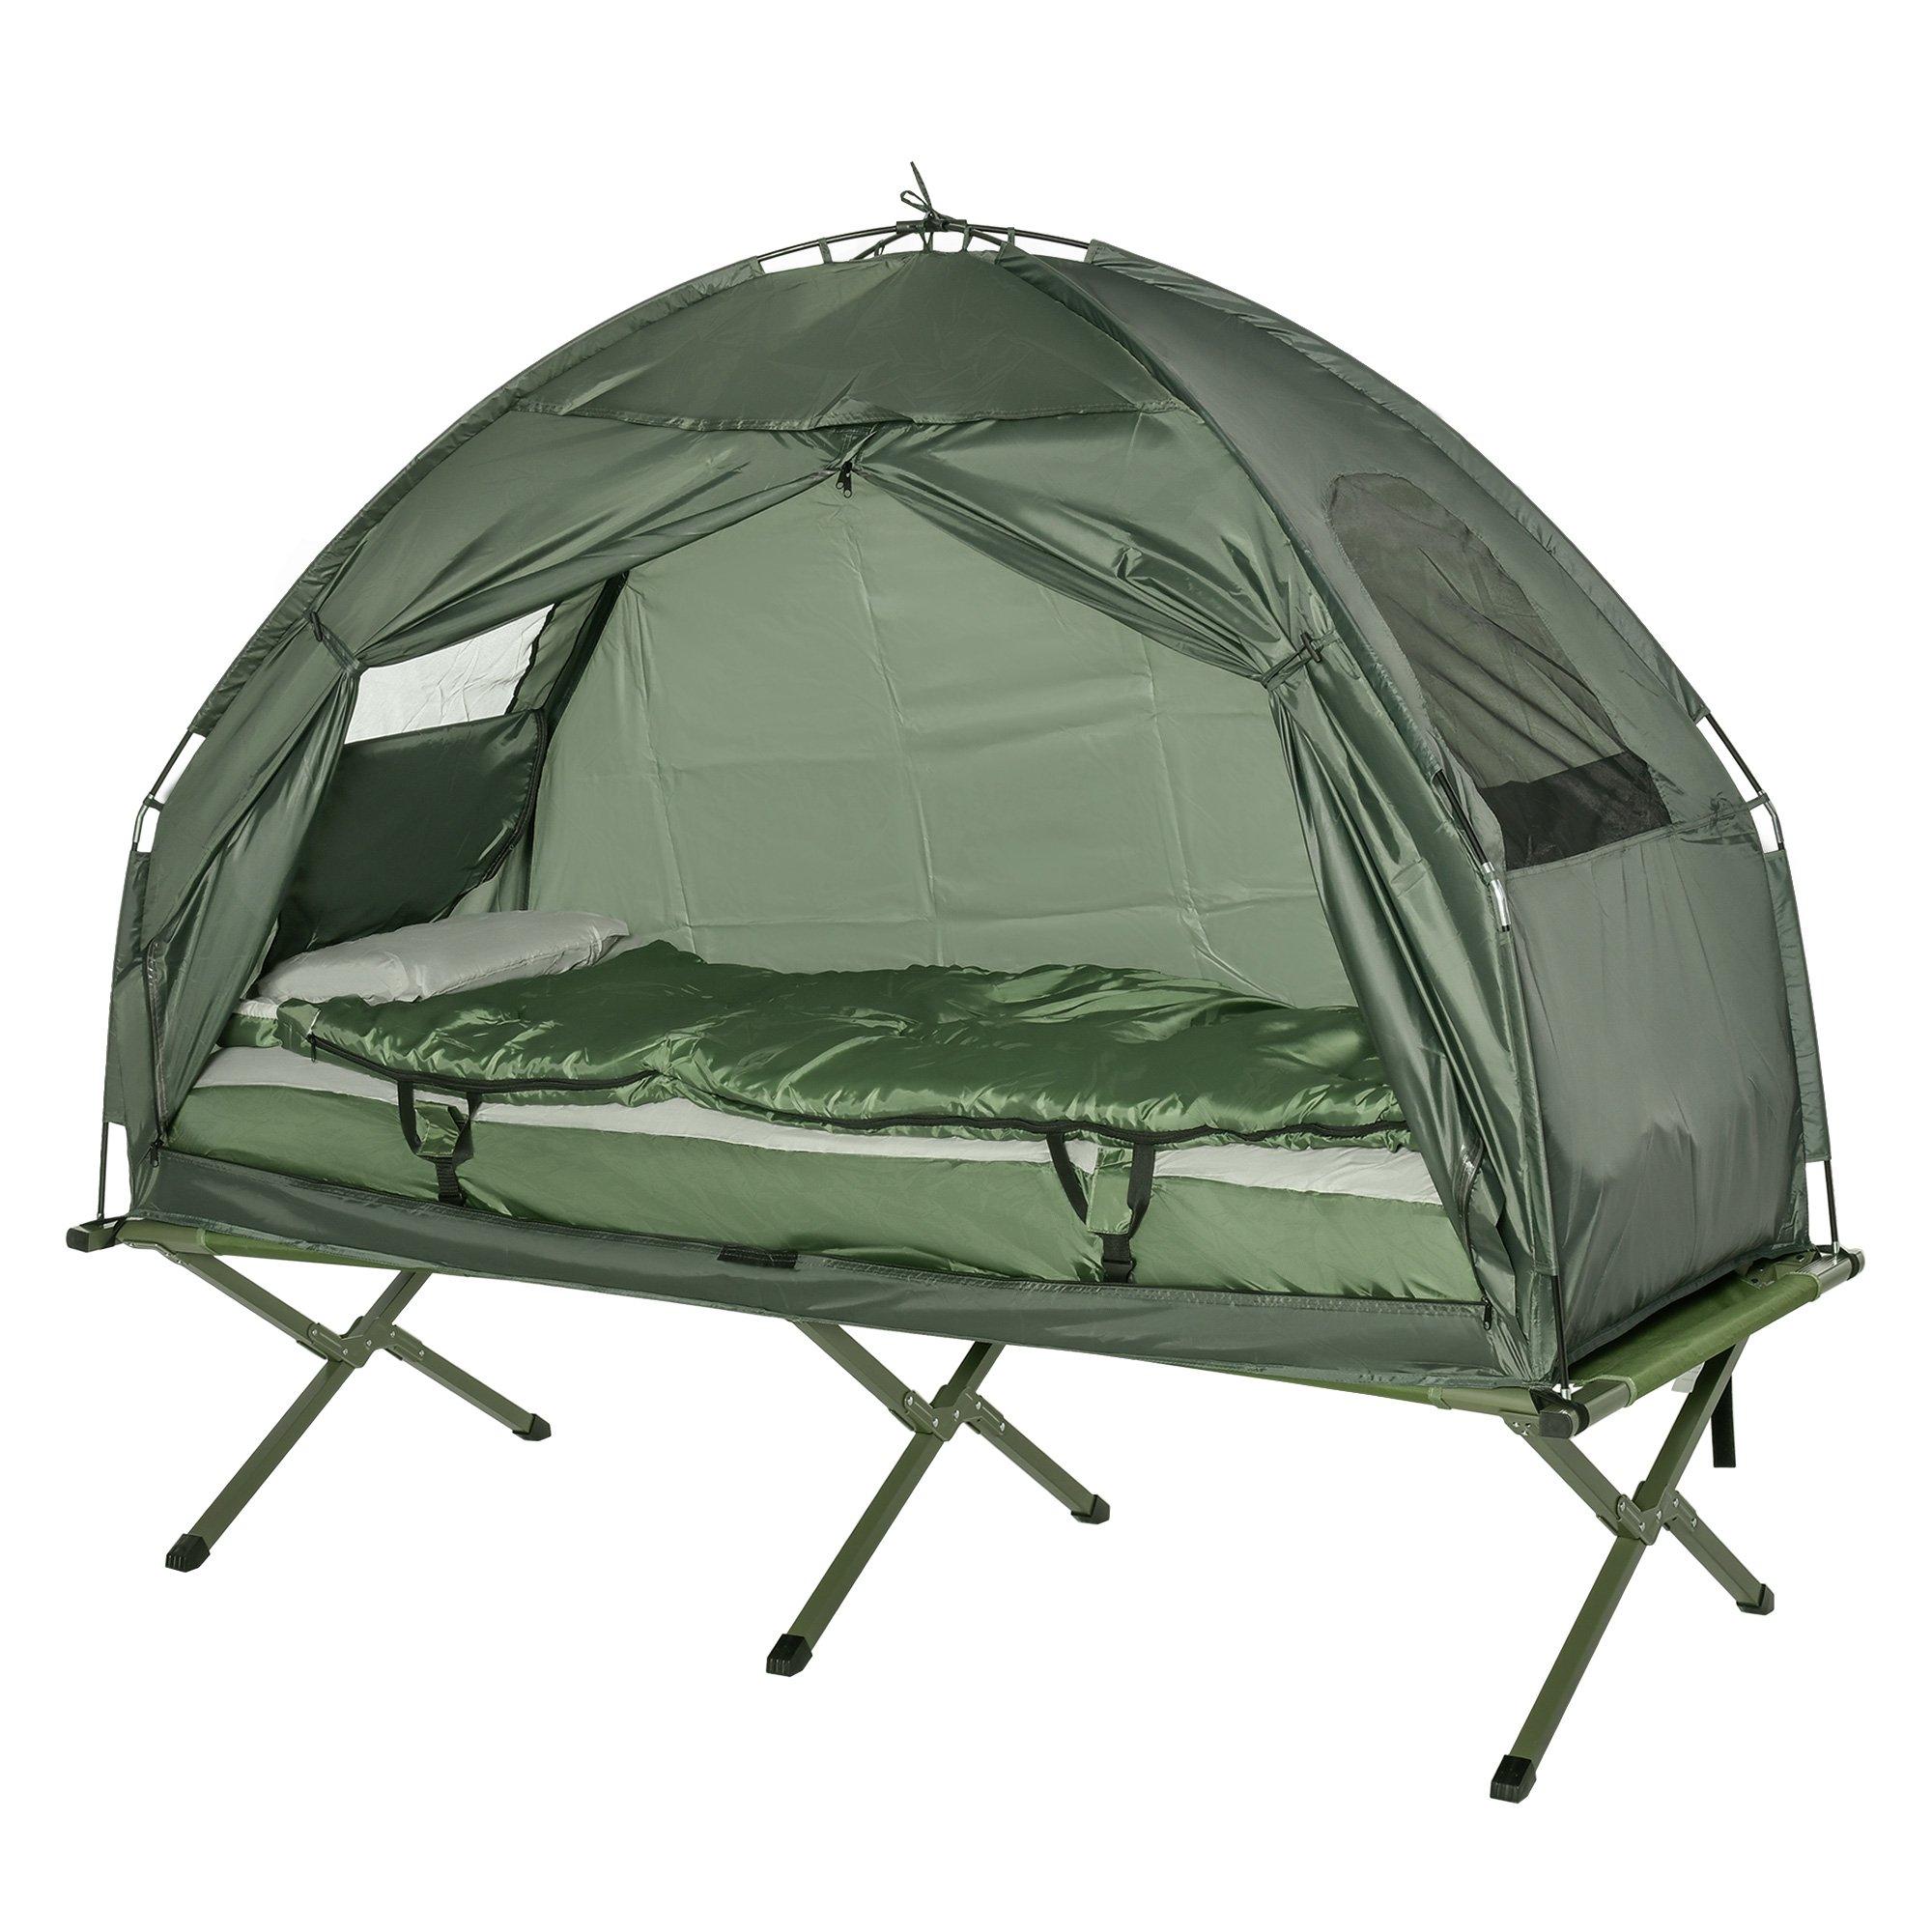 Outdoor 1 Person Folding Dome Tent Camping Bed Cot W/ Sleeping Bag